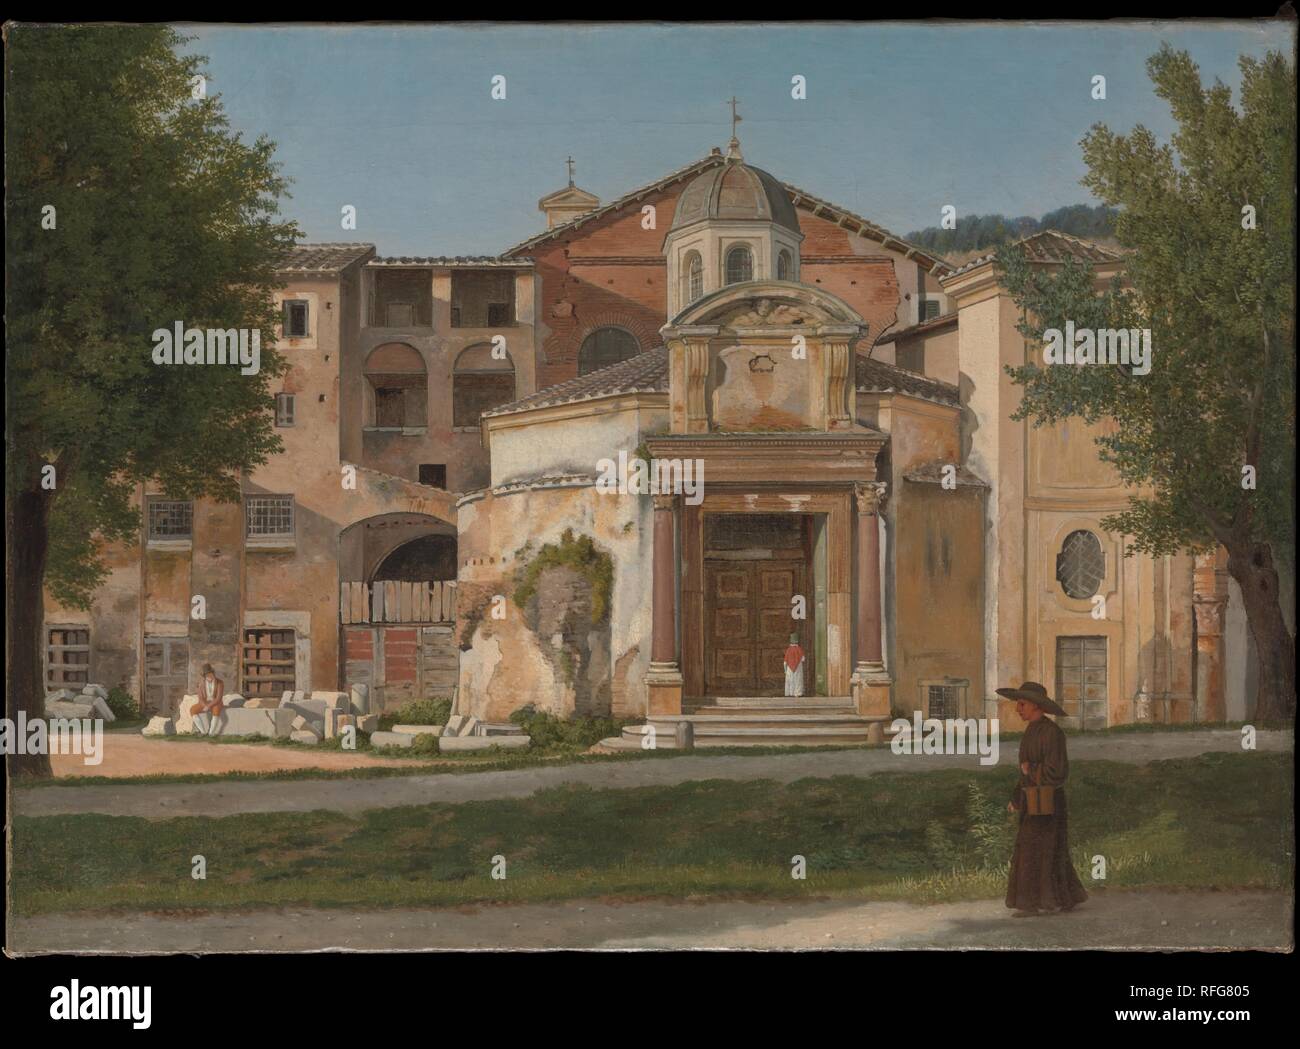 A Section of the Via Sacra, Rome (The Church of Saints Cosmas and Damian). Artist: Christoffer Wilhelm Eckersberg (Danish, Blåkrog 1783-1853 Copenhagen). Dimensions: 12 3/8 x 17 1/8 in. (31.4 x 43.5 cm). Date: ca. 1814-15.  In Rome, between 1813 and 1816, Eckersberg produced a series of urban prospects remarkable for their scrupulously simple compositions and saturated hues. These studies were painted in repeated sittings before the motif in order to faithfully reproduce the effects of the Mediterranean sun on architectural ensembles. This frieze-like view depicts the fourth-century Temple of  Stock Photo